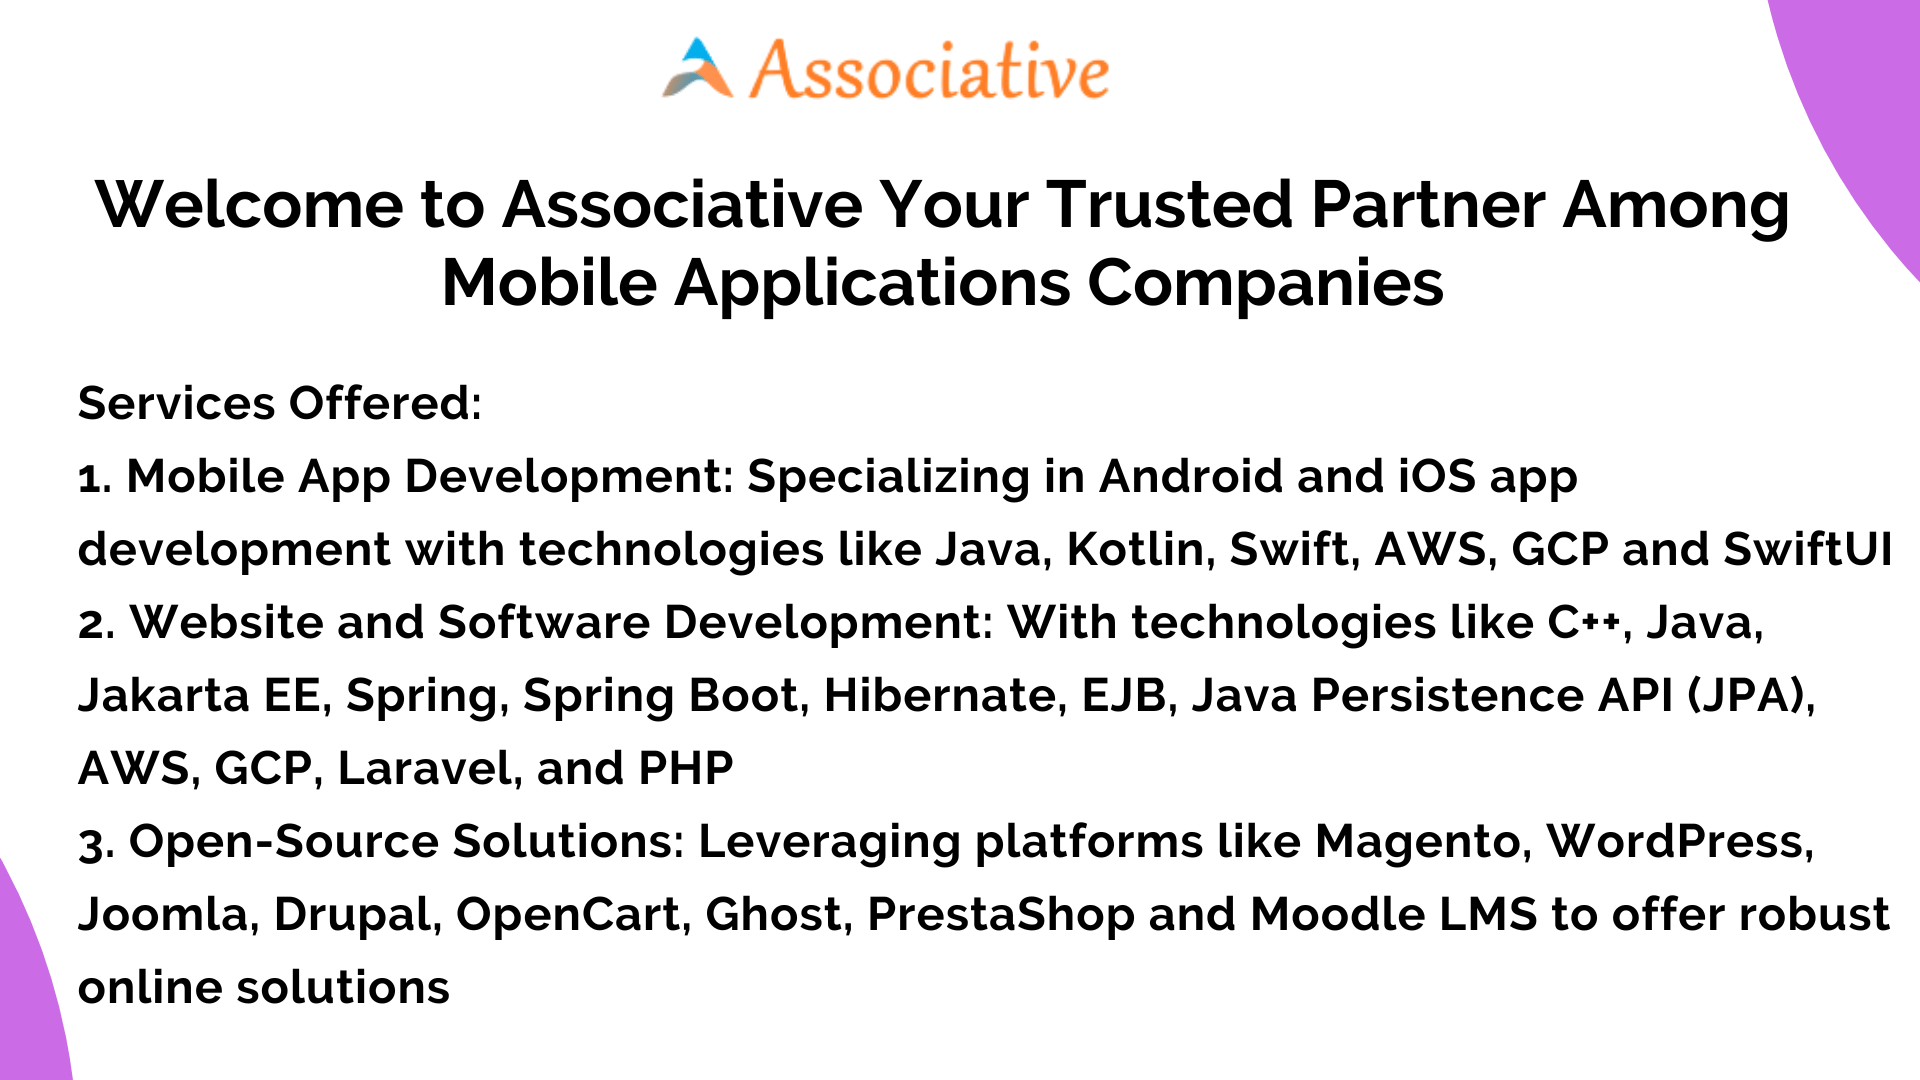 Welcome to Associative Your Trusted Partner Among Mobile Applications Companies